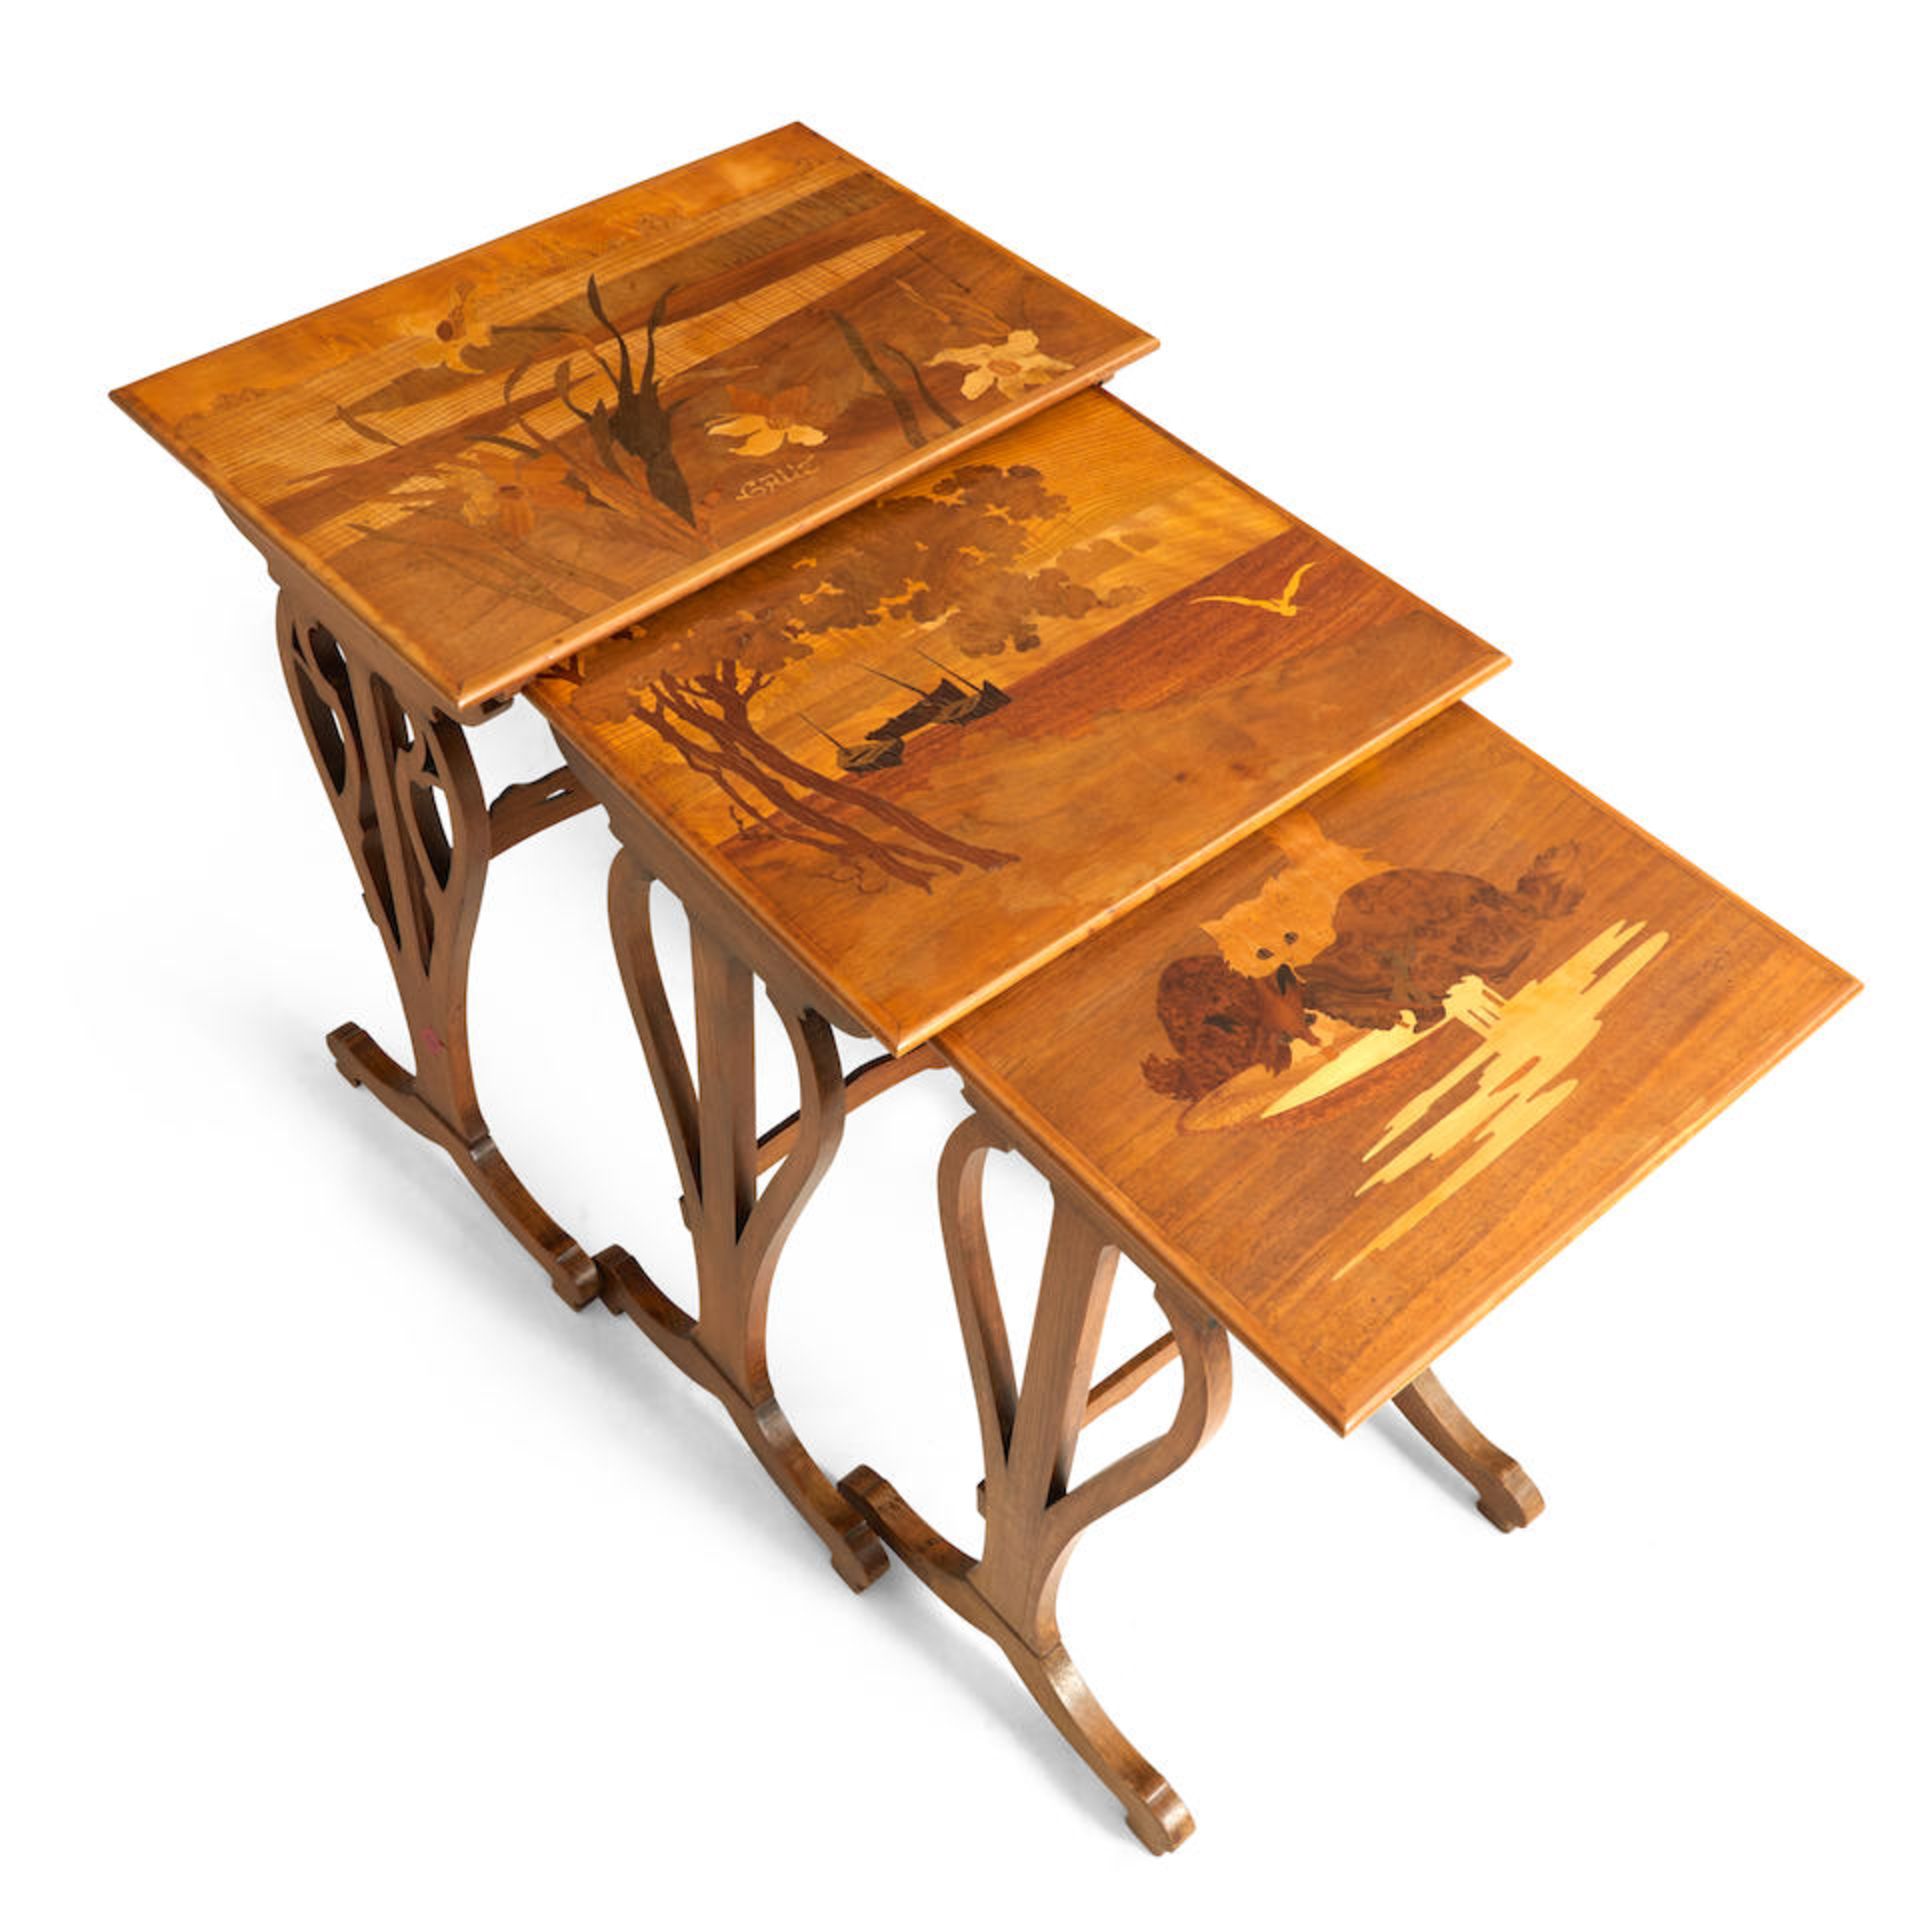 THREE GALLE MARQUETRY-INLAID NESTING TABLES, Nancy, France, c. 1900, inlayed mark 'Galle,' marqu...